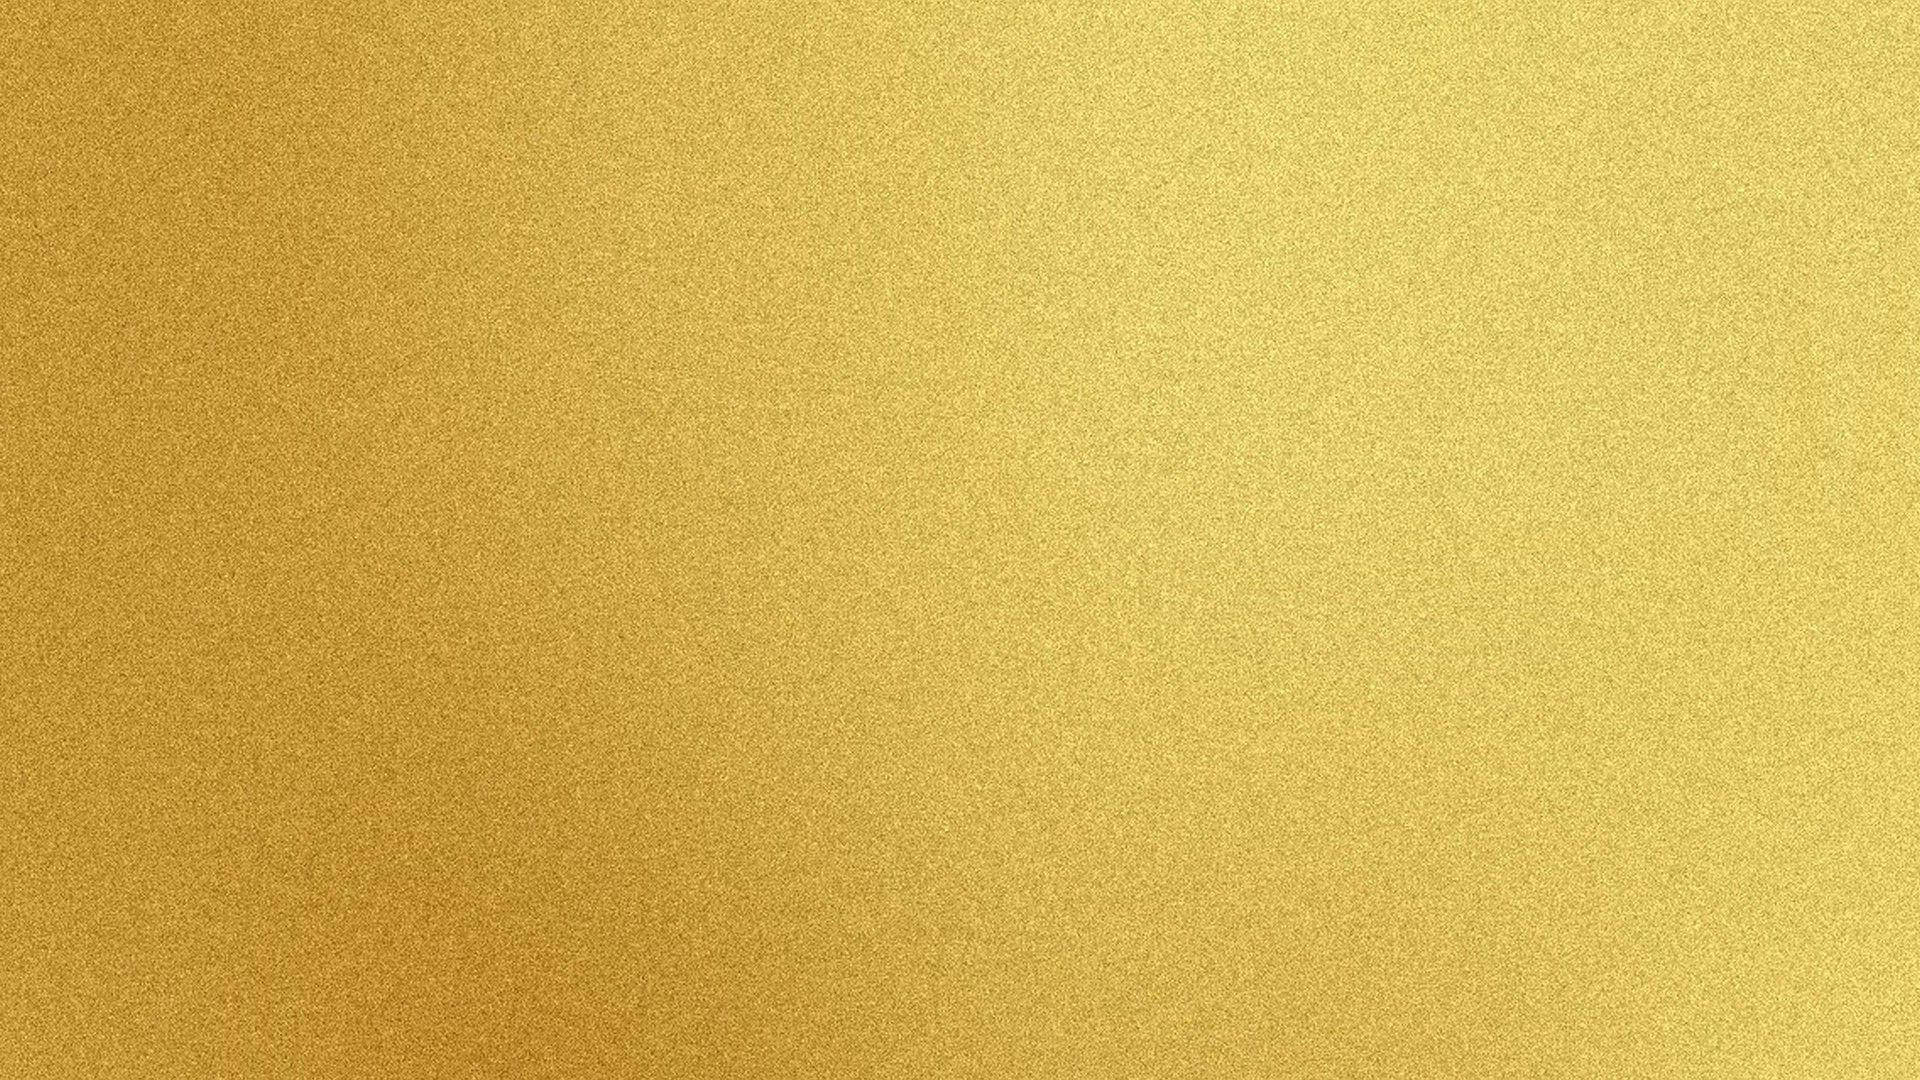 Free Gold Wallpaper Downloads, [600+] Gold Wallpapers for FREE | Wallpapers .com